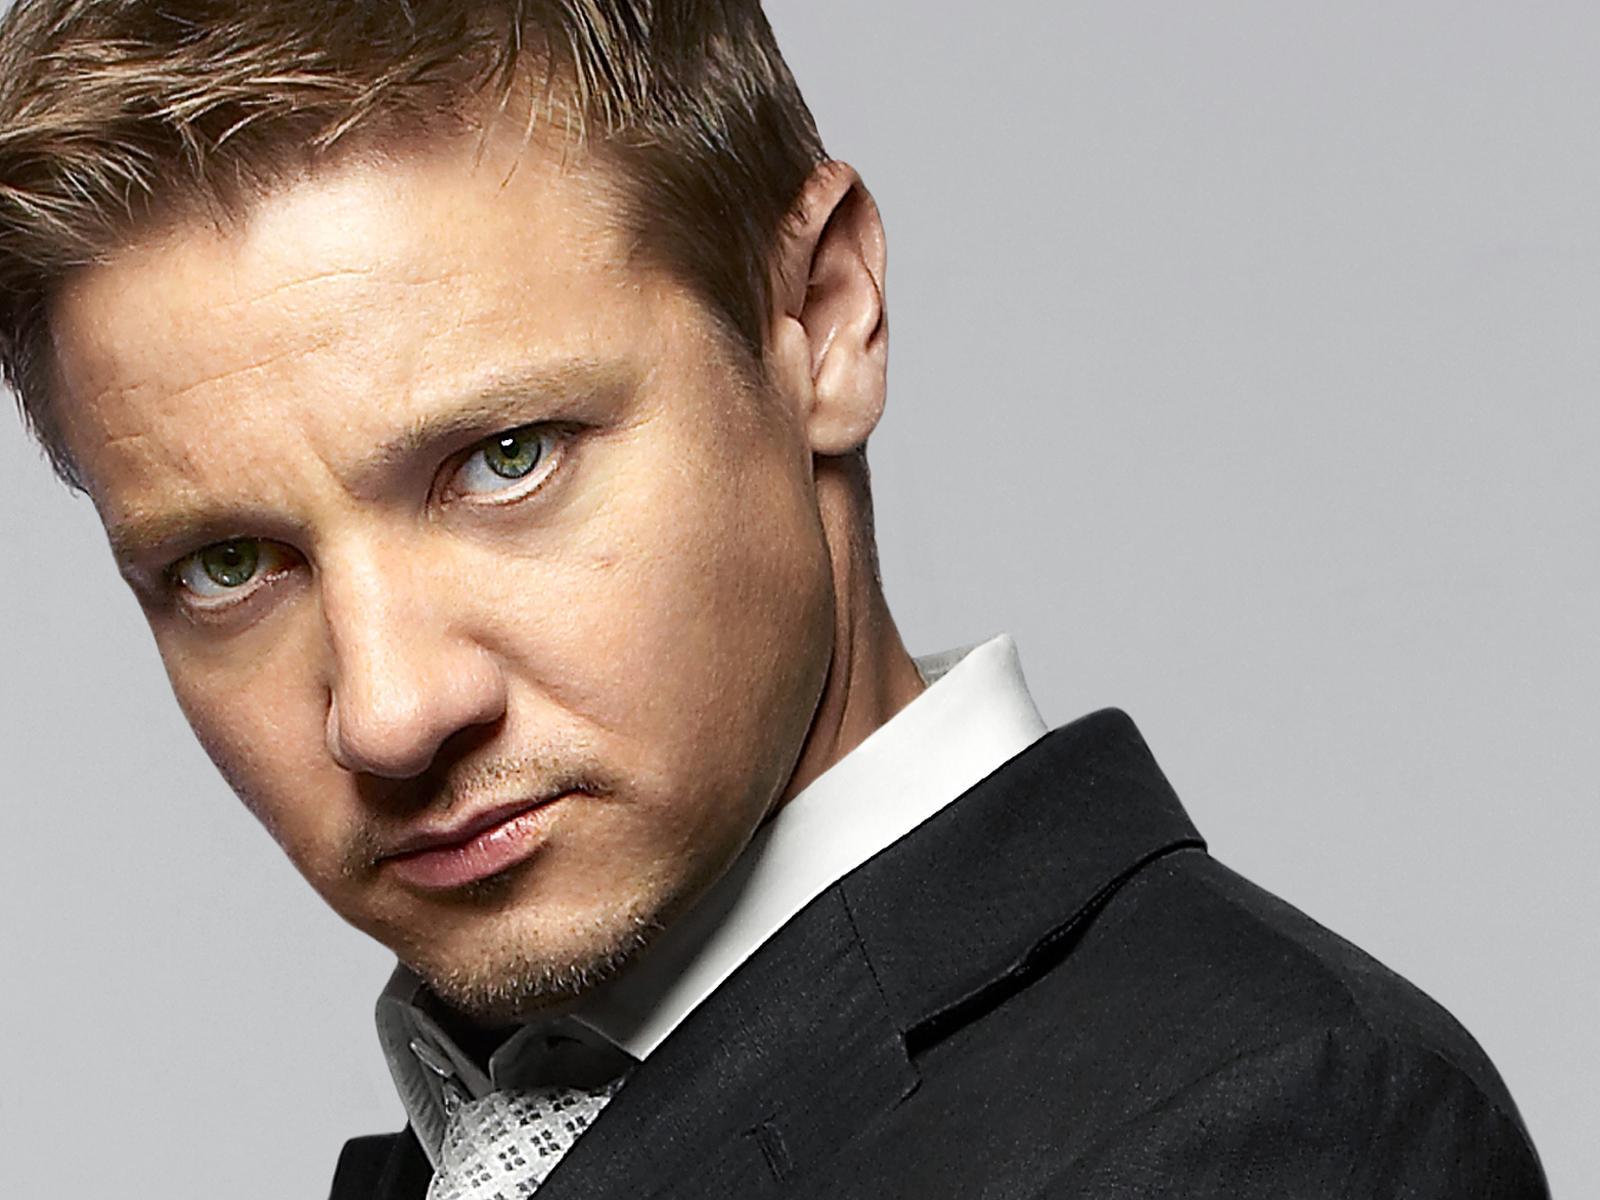 jeremy renner PICTURE. Free Download Image Online